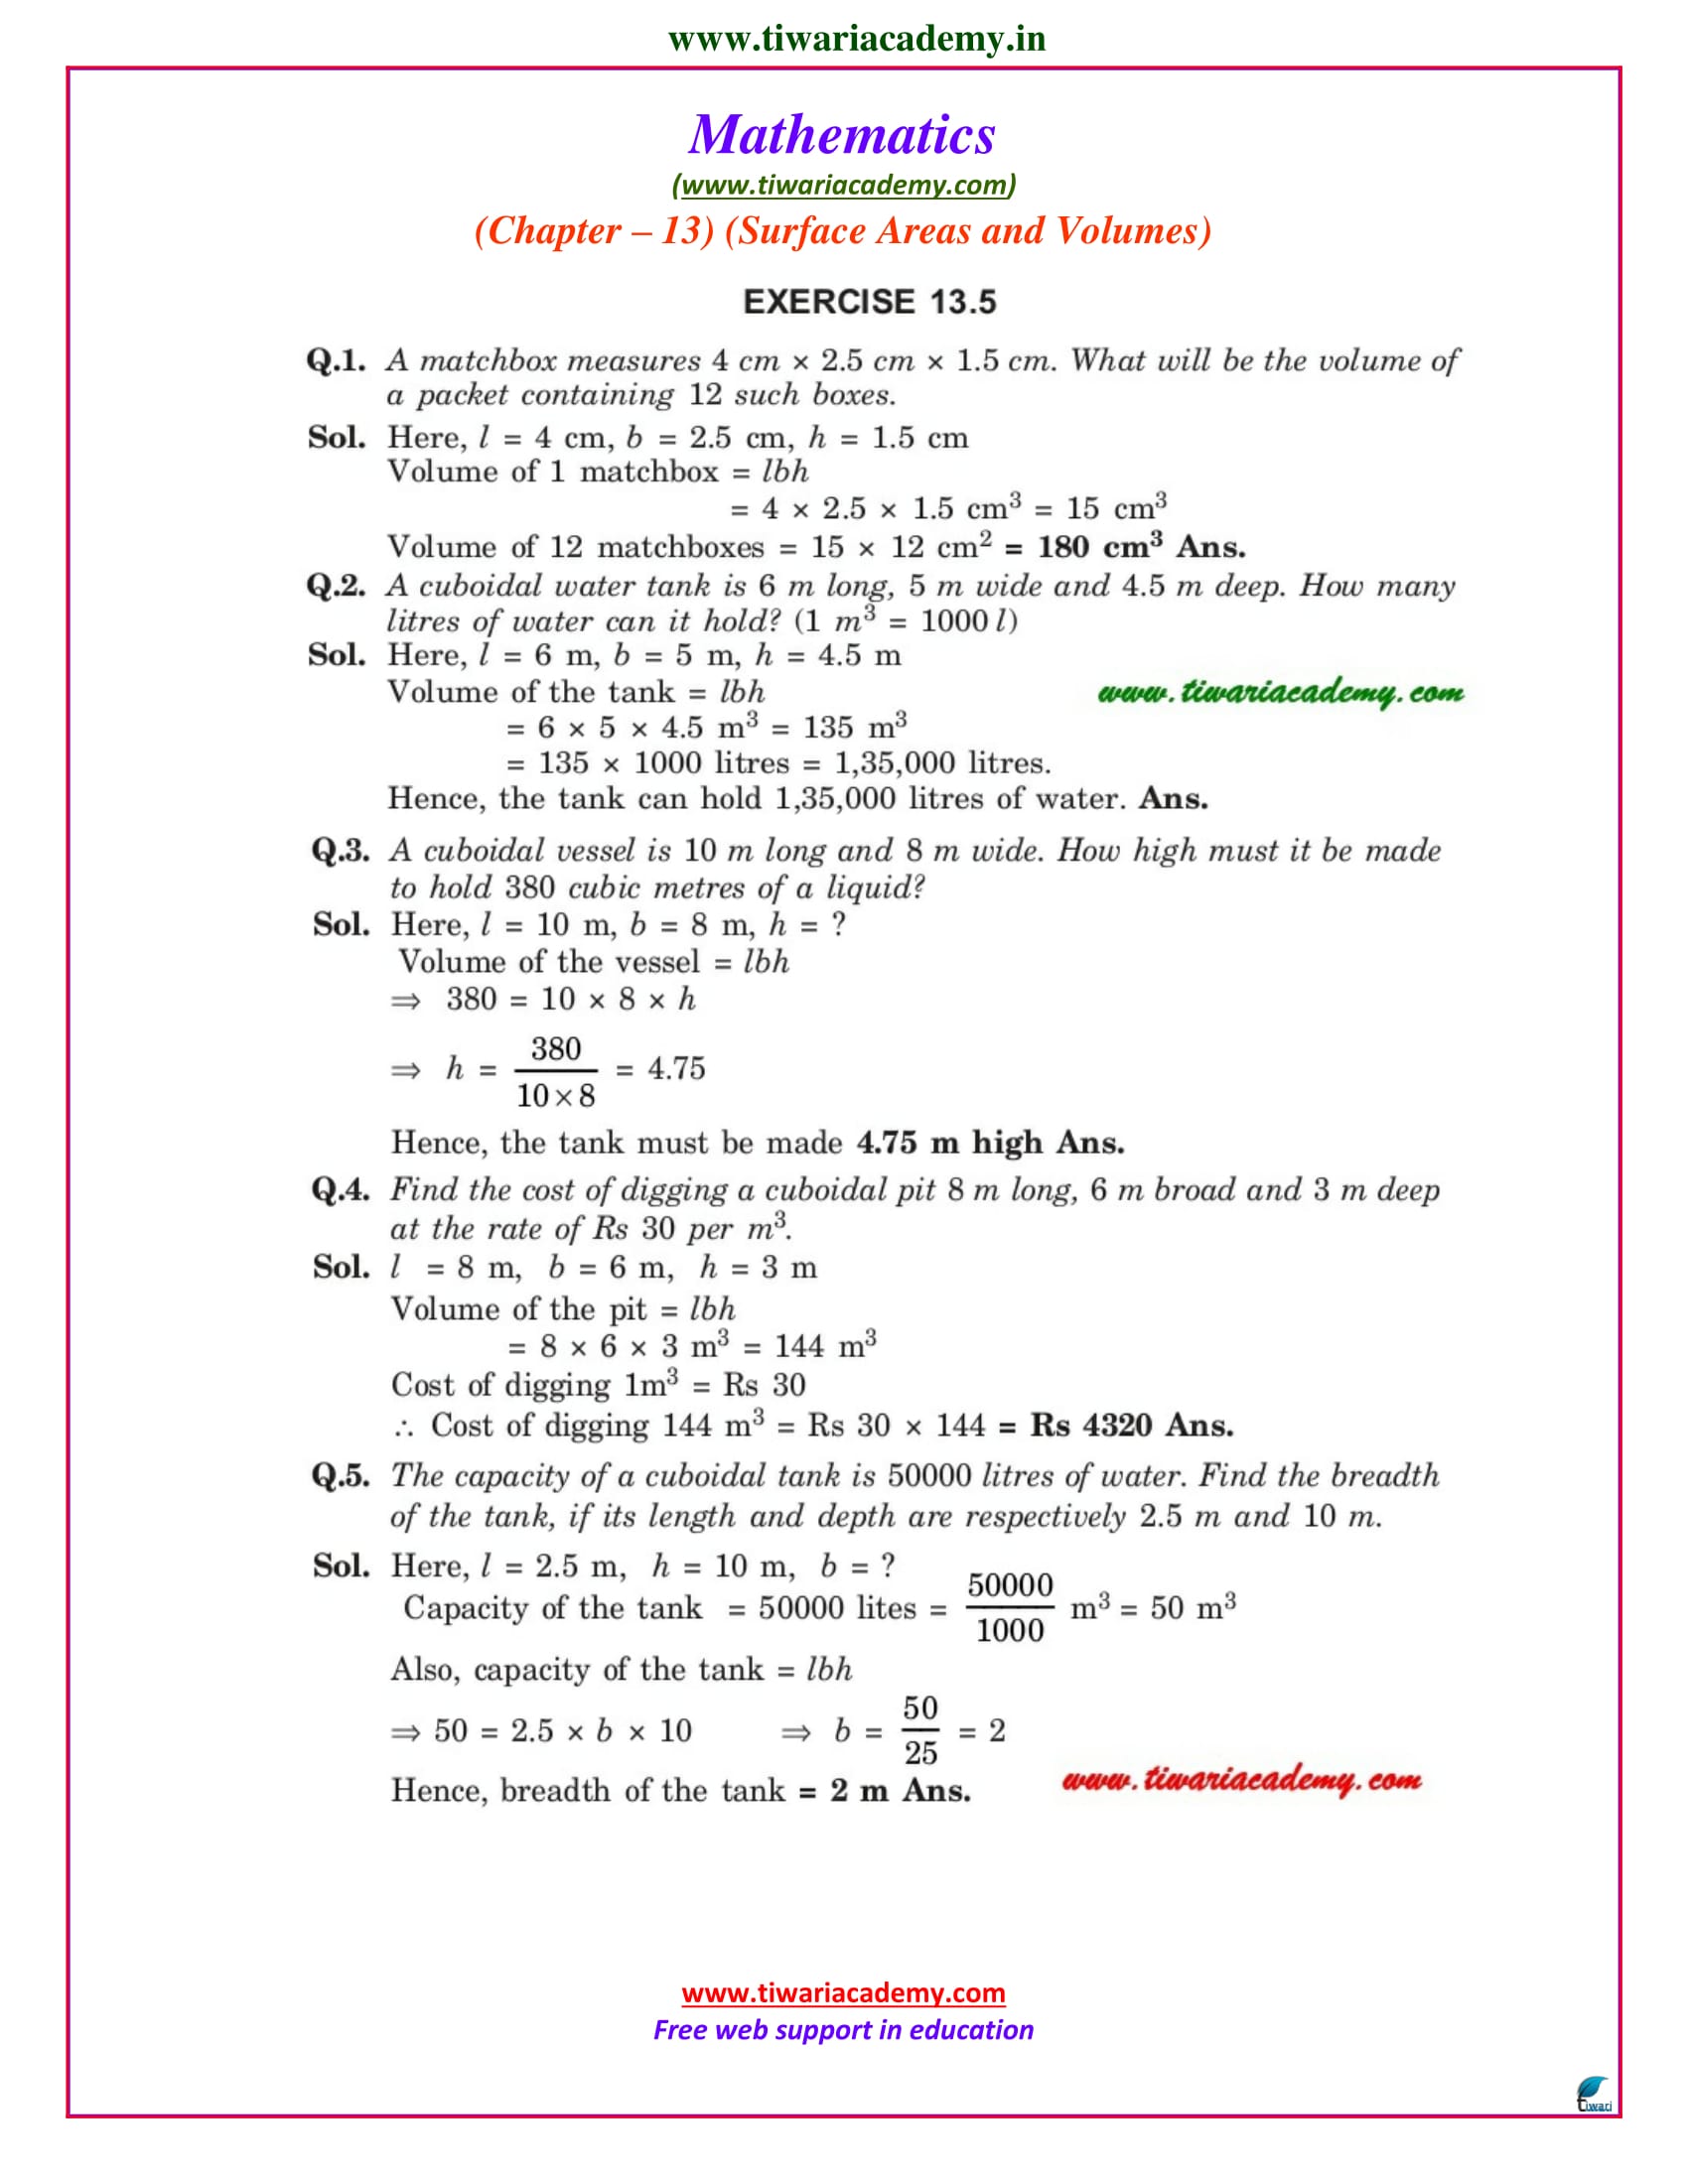 NCERT Solutions for Class 9 Maths Chapter 13 Exercise 13.5